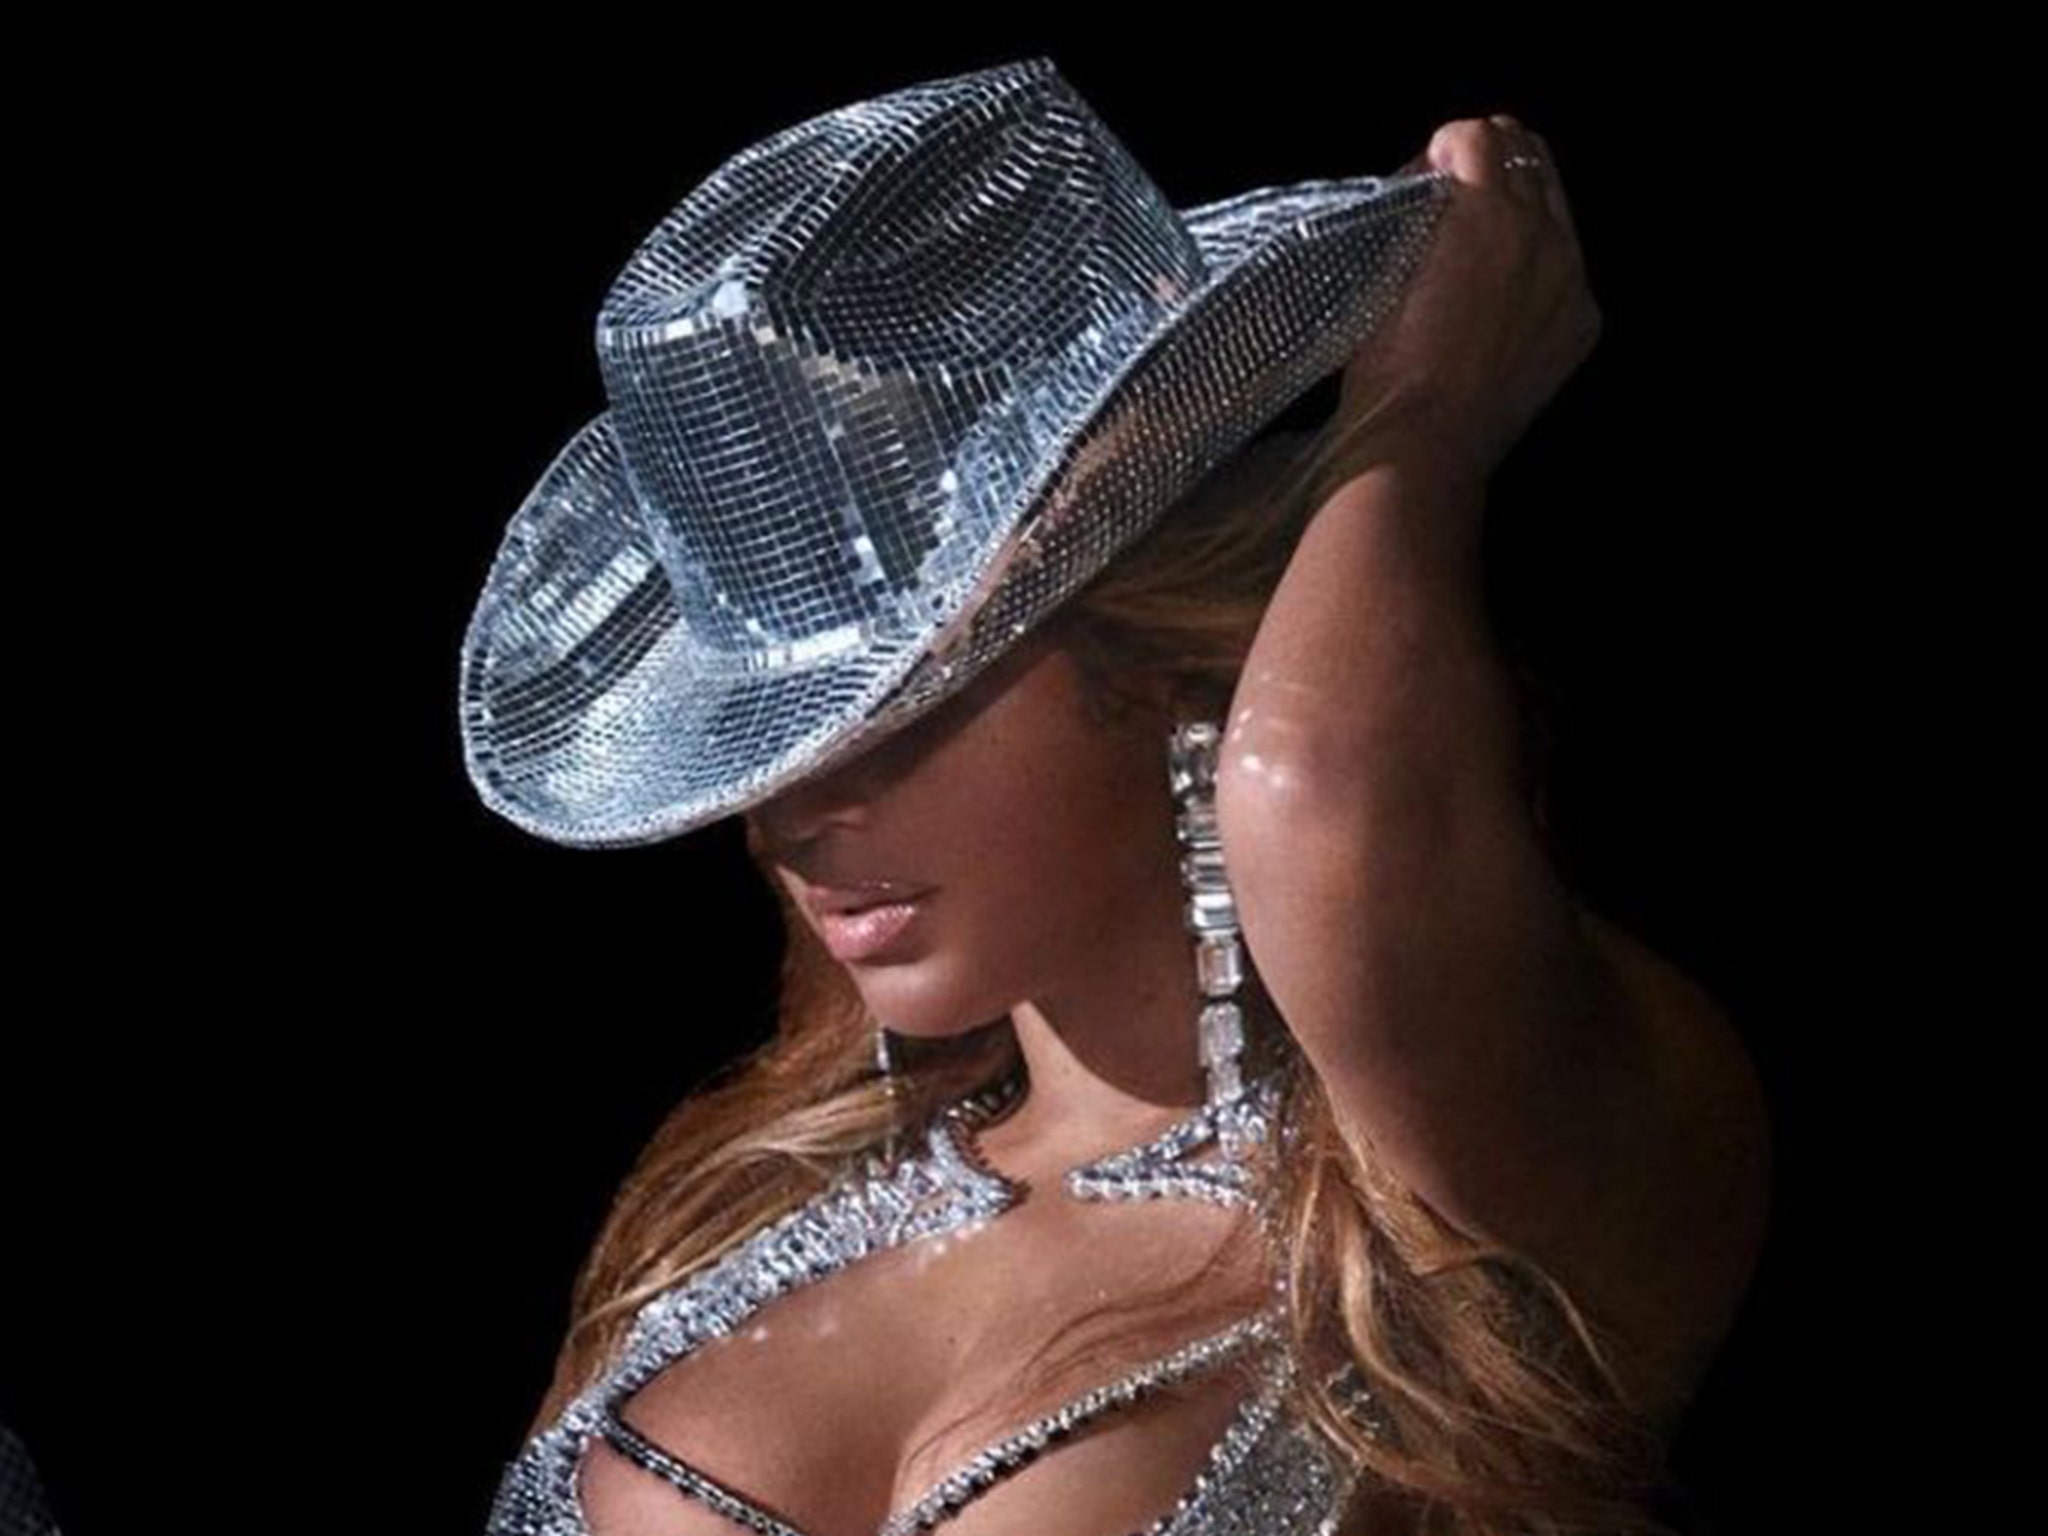 Beyoncé Disco Ball Cowboy Hat Sells Out,  Shop Bombarded With